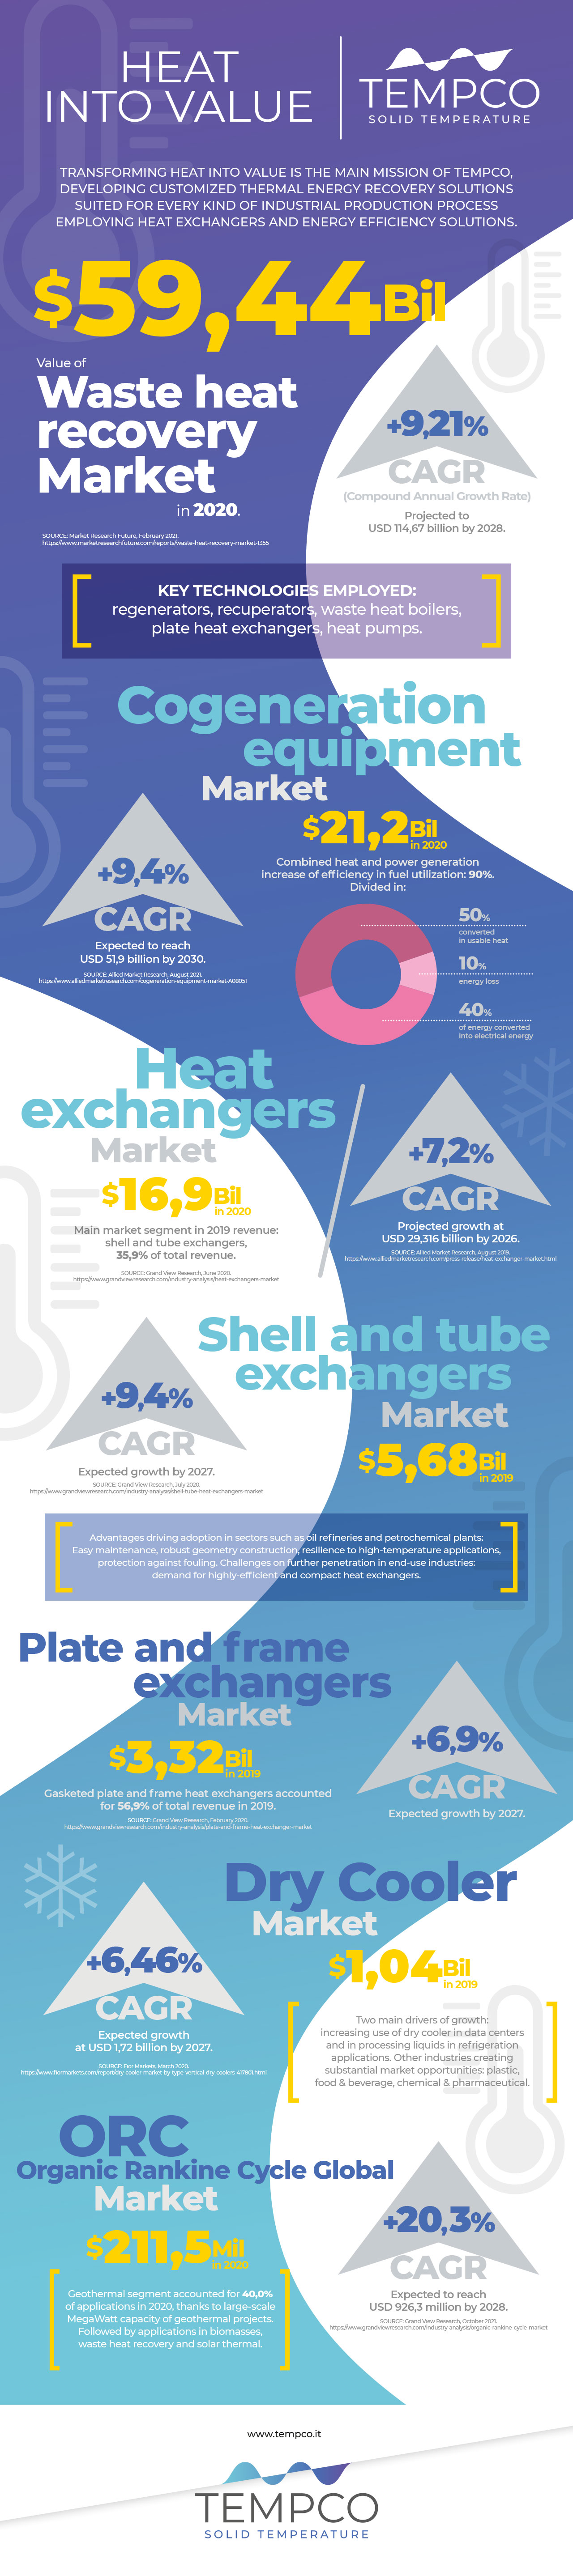 Infographic - From heat to value